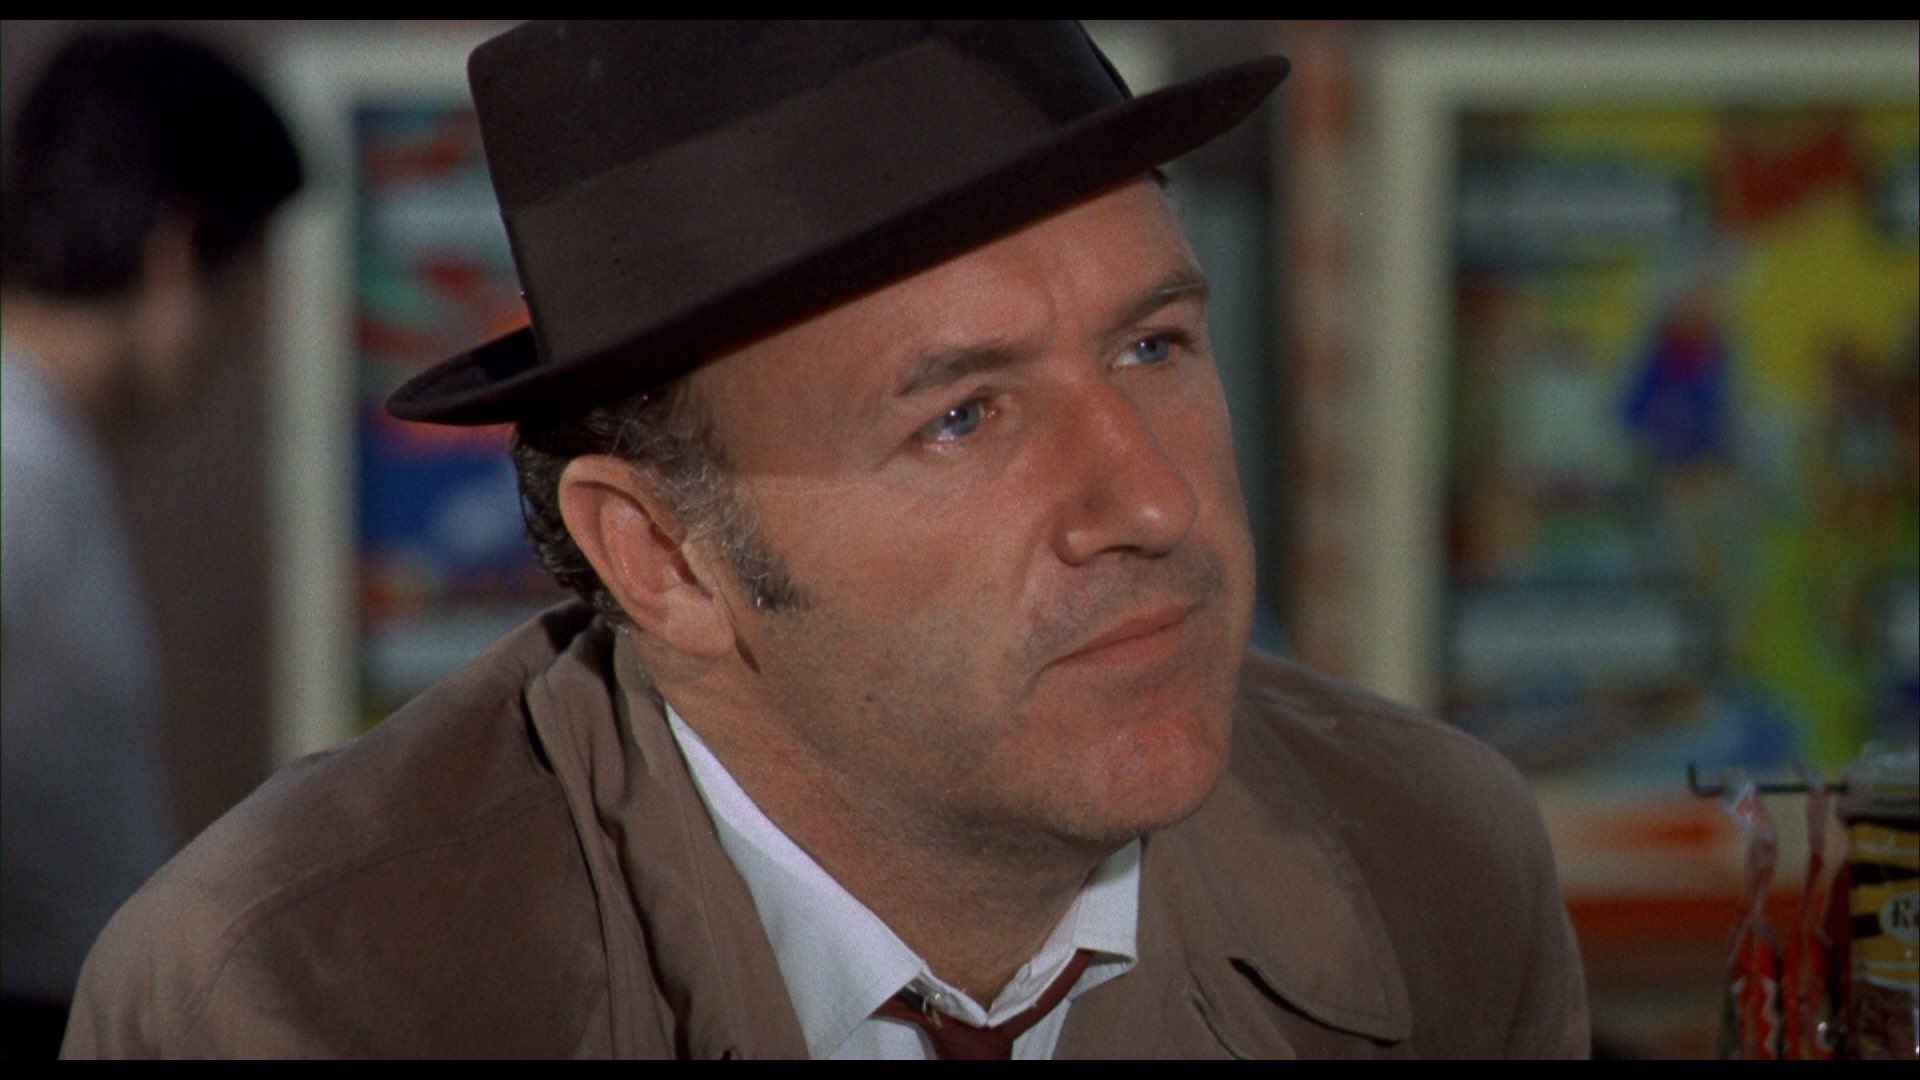 Happy 90th birthday (on 1/30) to Gene Hackman, one of the best actors of his generation.  